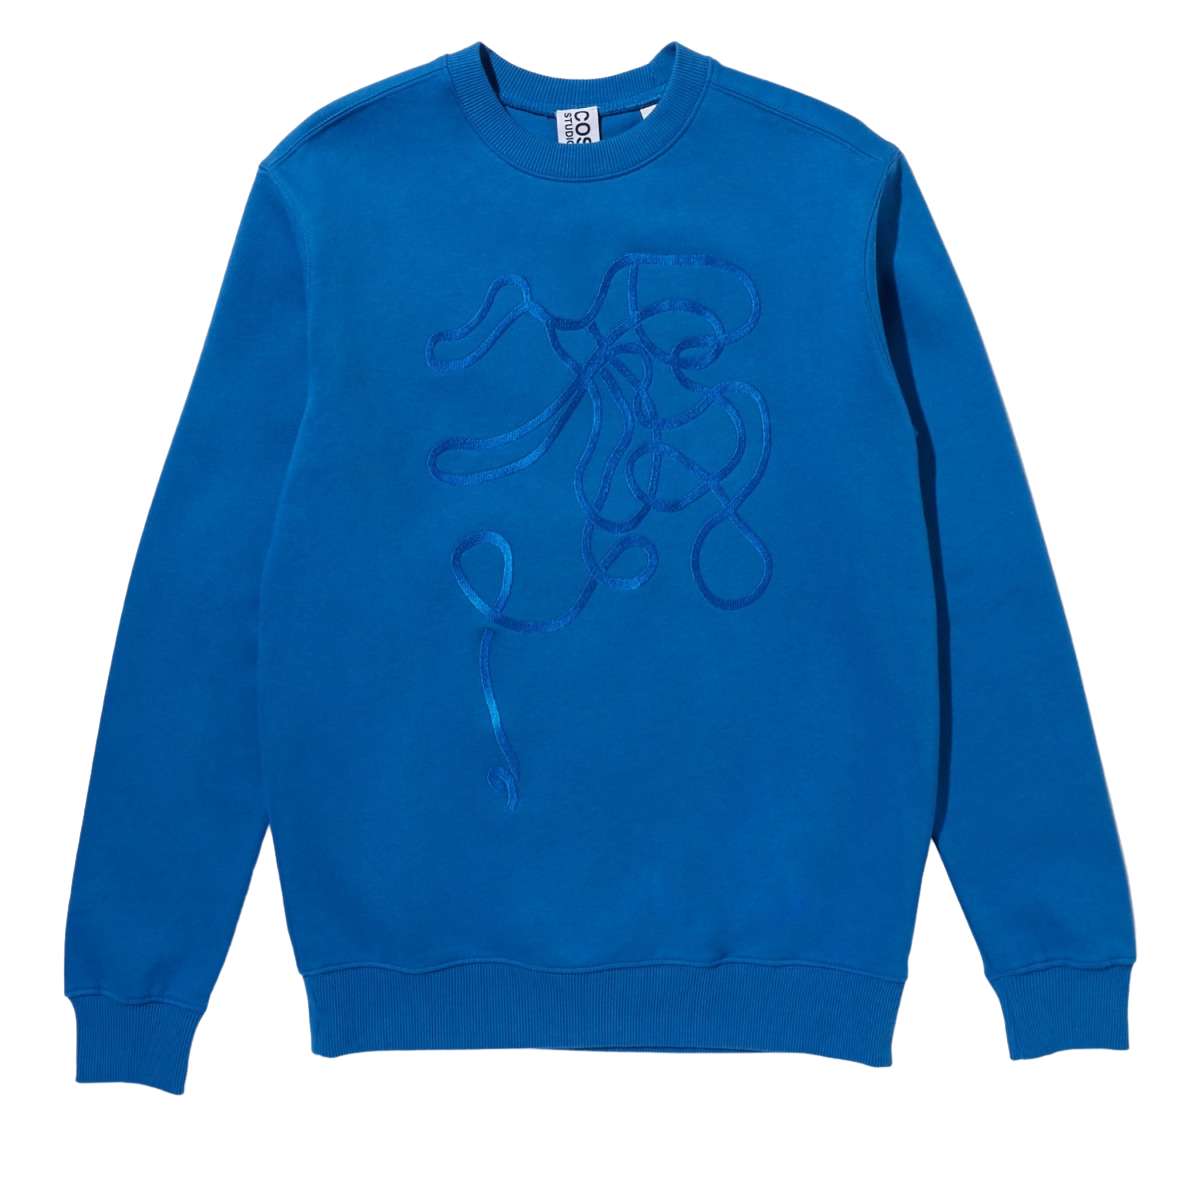 https://storage.googleapis.com/download/storage/v1/b/whering.appspot.com/o/marketplace_product_images%2Fcostello-studio-tangled-embroidered-sweatshirt-cobalt-blue-wzQDnhXApqYZtbZQnToFhb.png?generation=1677690358382534&alt=media